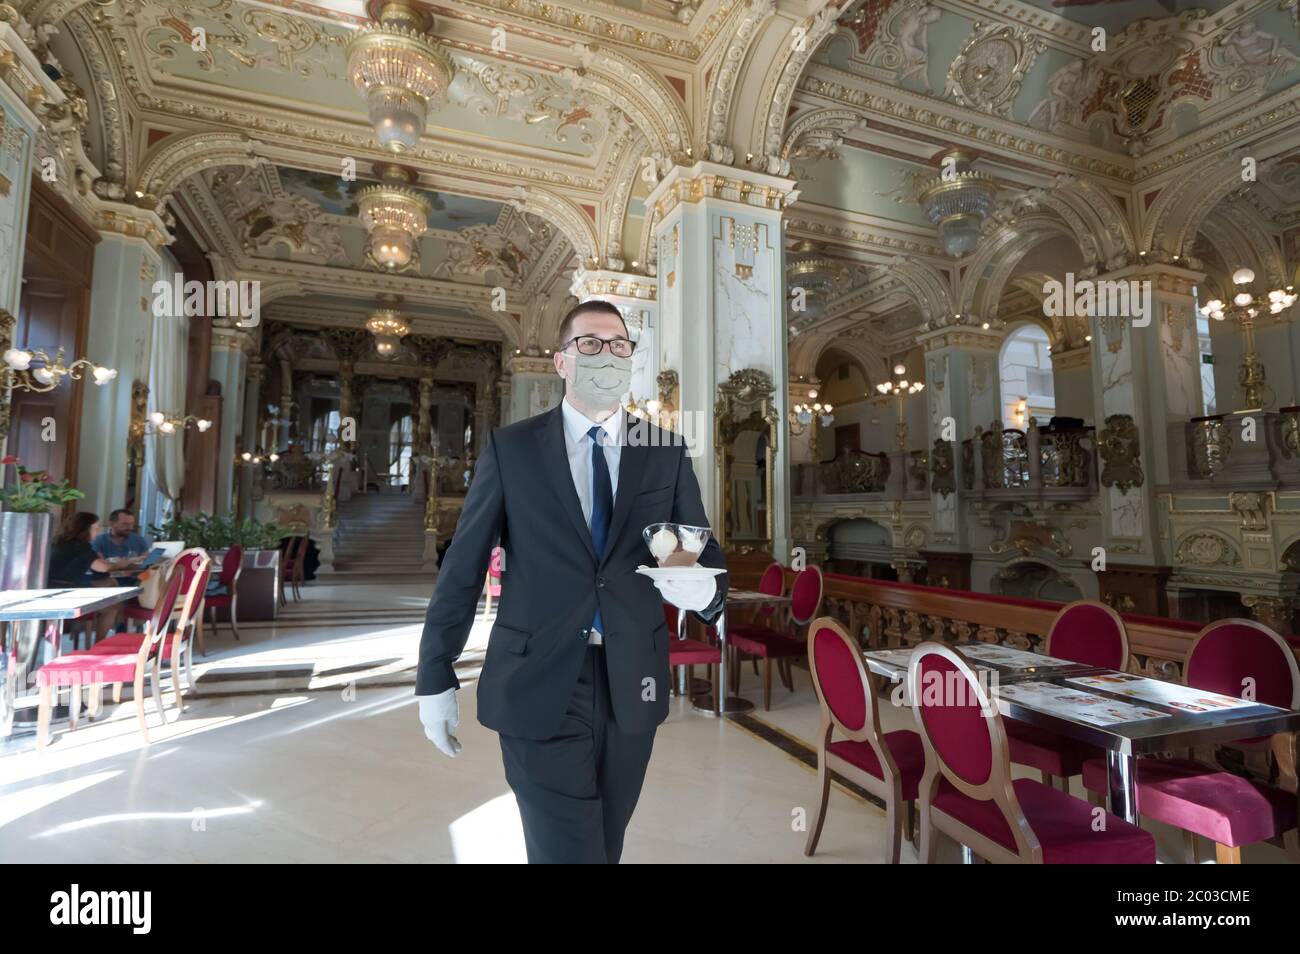 (200611) -- BUDAPEST, June 11, 2020 (Xinhua) -- A waiter is seen serving customers at the reopened New York Cafe in Budapest, Hungary on June 10, 2020. Customers are allowed to enter the inside of cafe bars as the novel coronavirus pandemic has subsided and the COVID-19 restrictions were gradually lifted in Hungary. (Photo by Attila Volgyi/Xinhua) Stock Photo